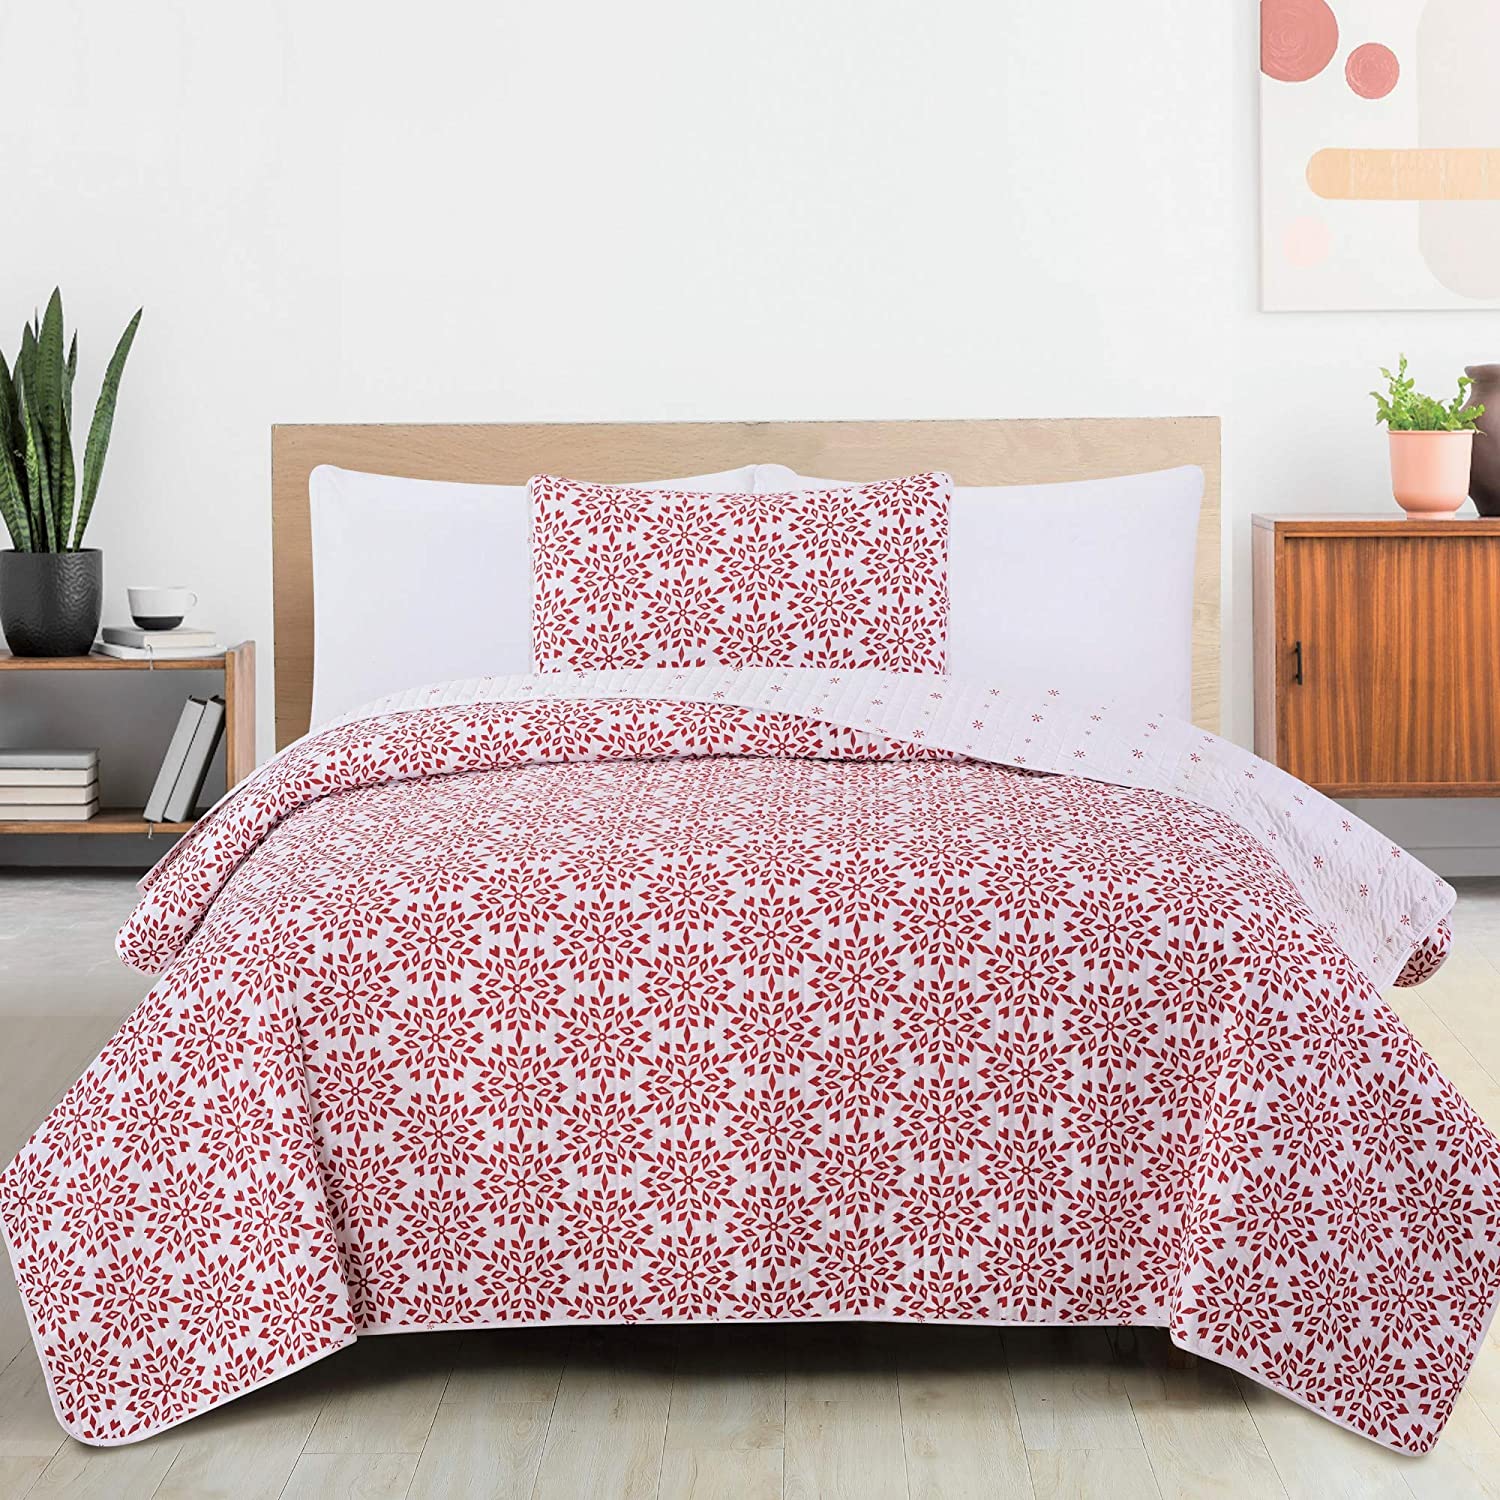 Microfiber Bedspread with Holiday Patte Details about   3-Piece Reversible Quilt Set with Shams 